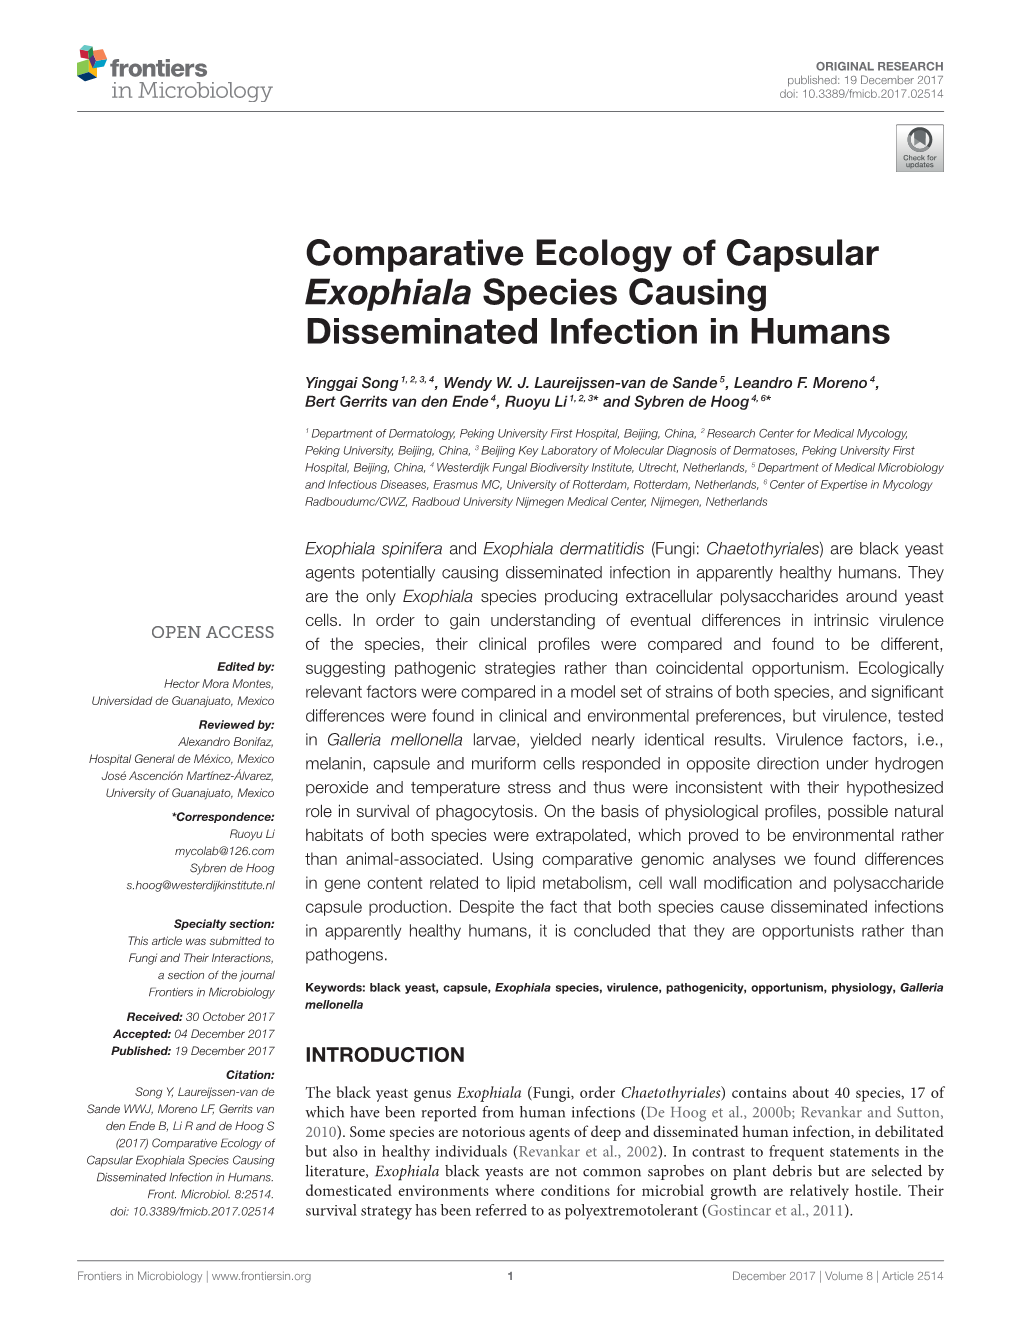 Comparative Ecology of Capsular Exophiala Species Causing Disseminated Infection in Humans